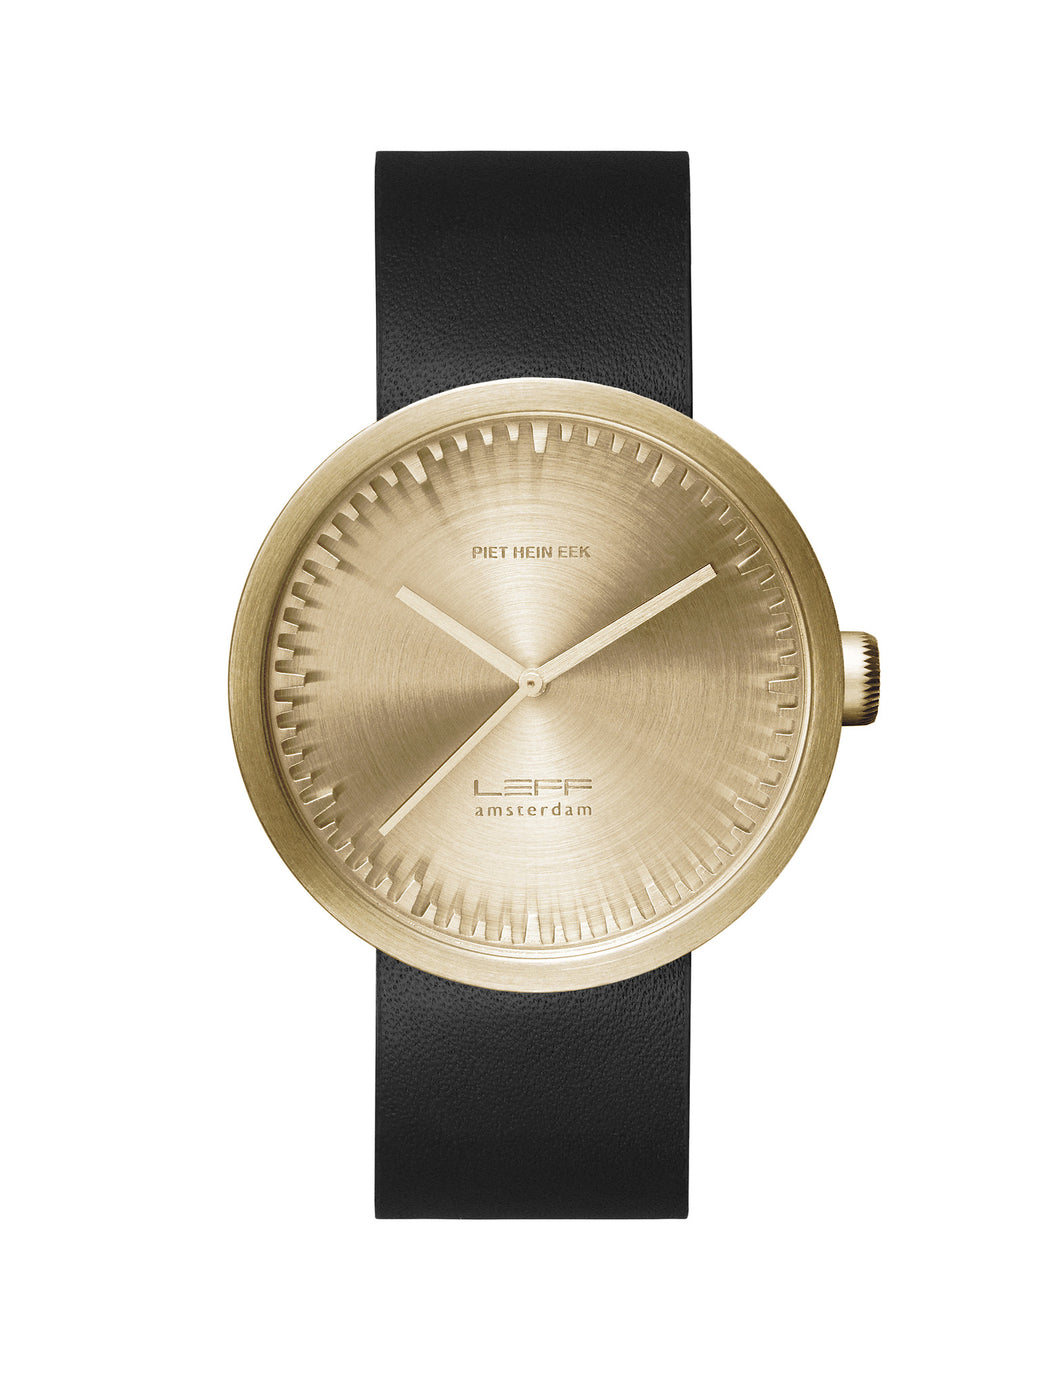 Tube watch D42 brass with black leather strap